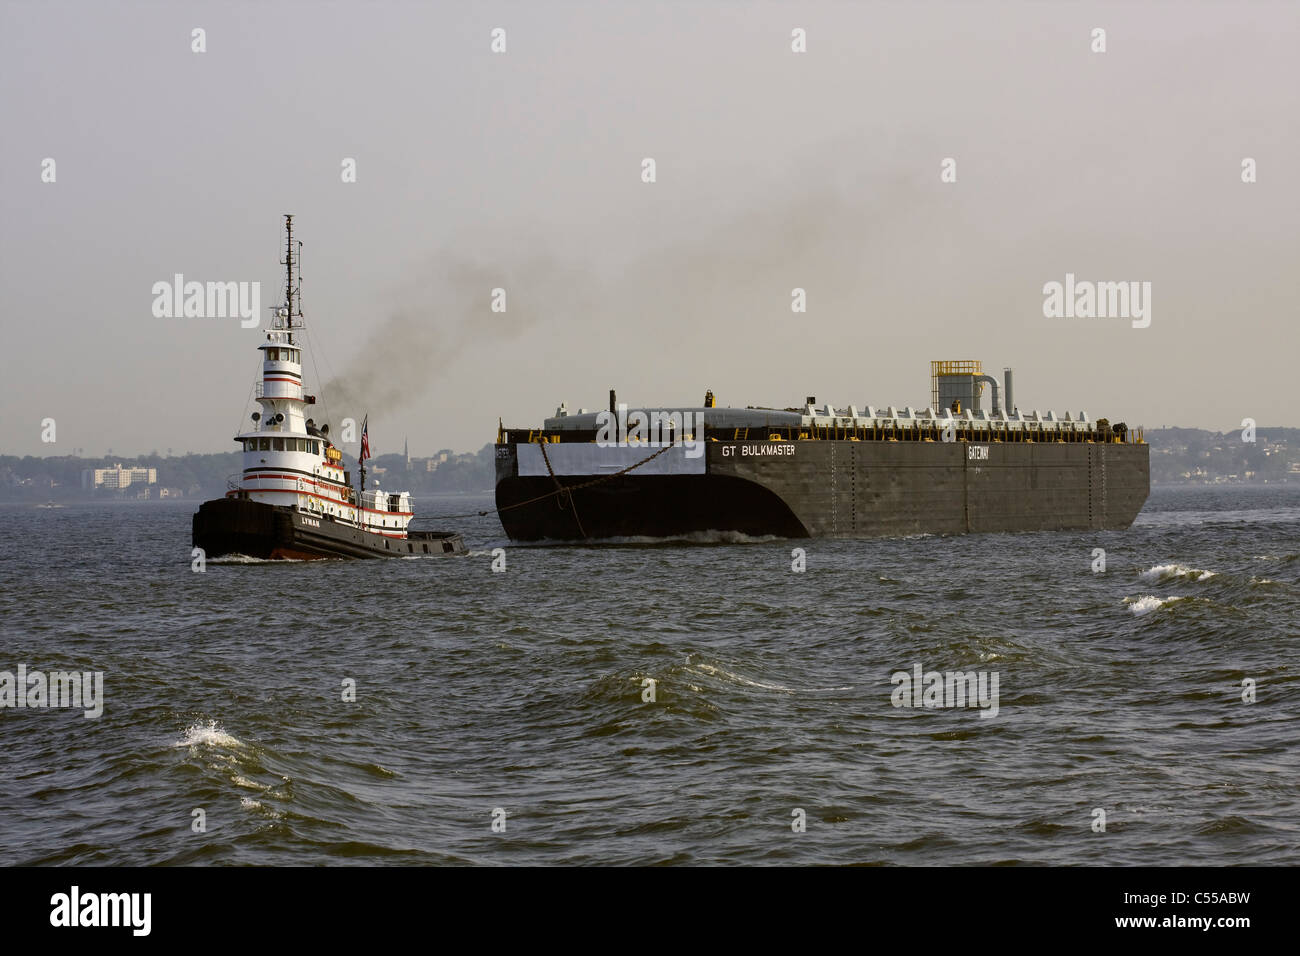 Tugboat 'LYMAN' with second pilothouse towing a barge 'GT BULKMASTER' in New York Harbor Stock Photo